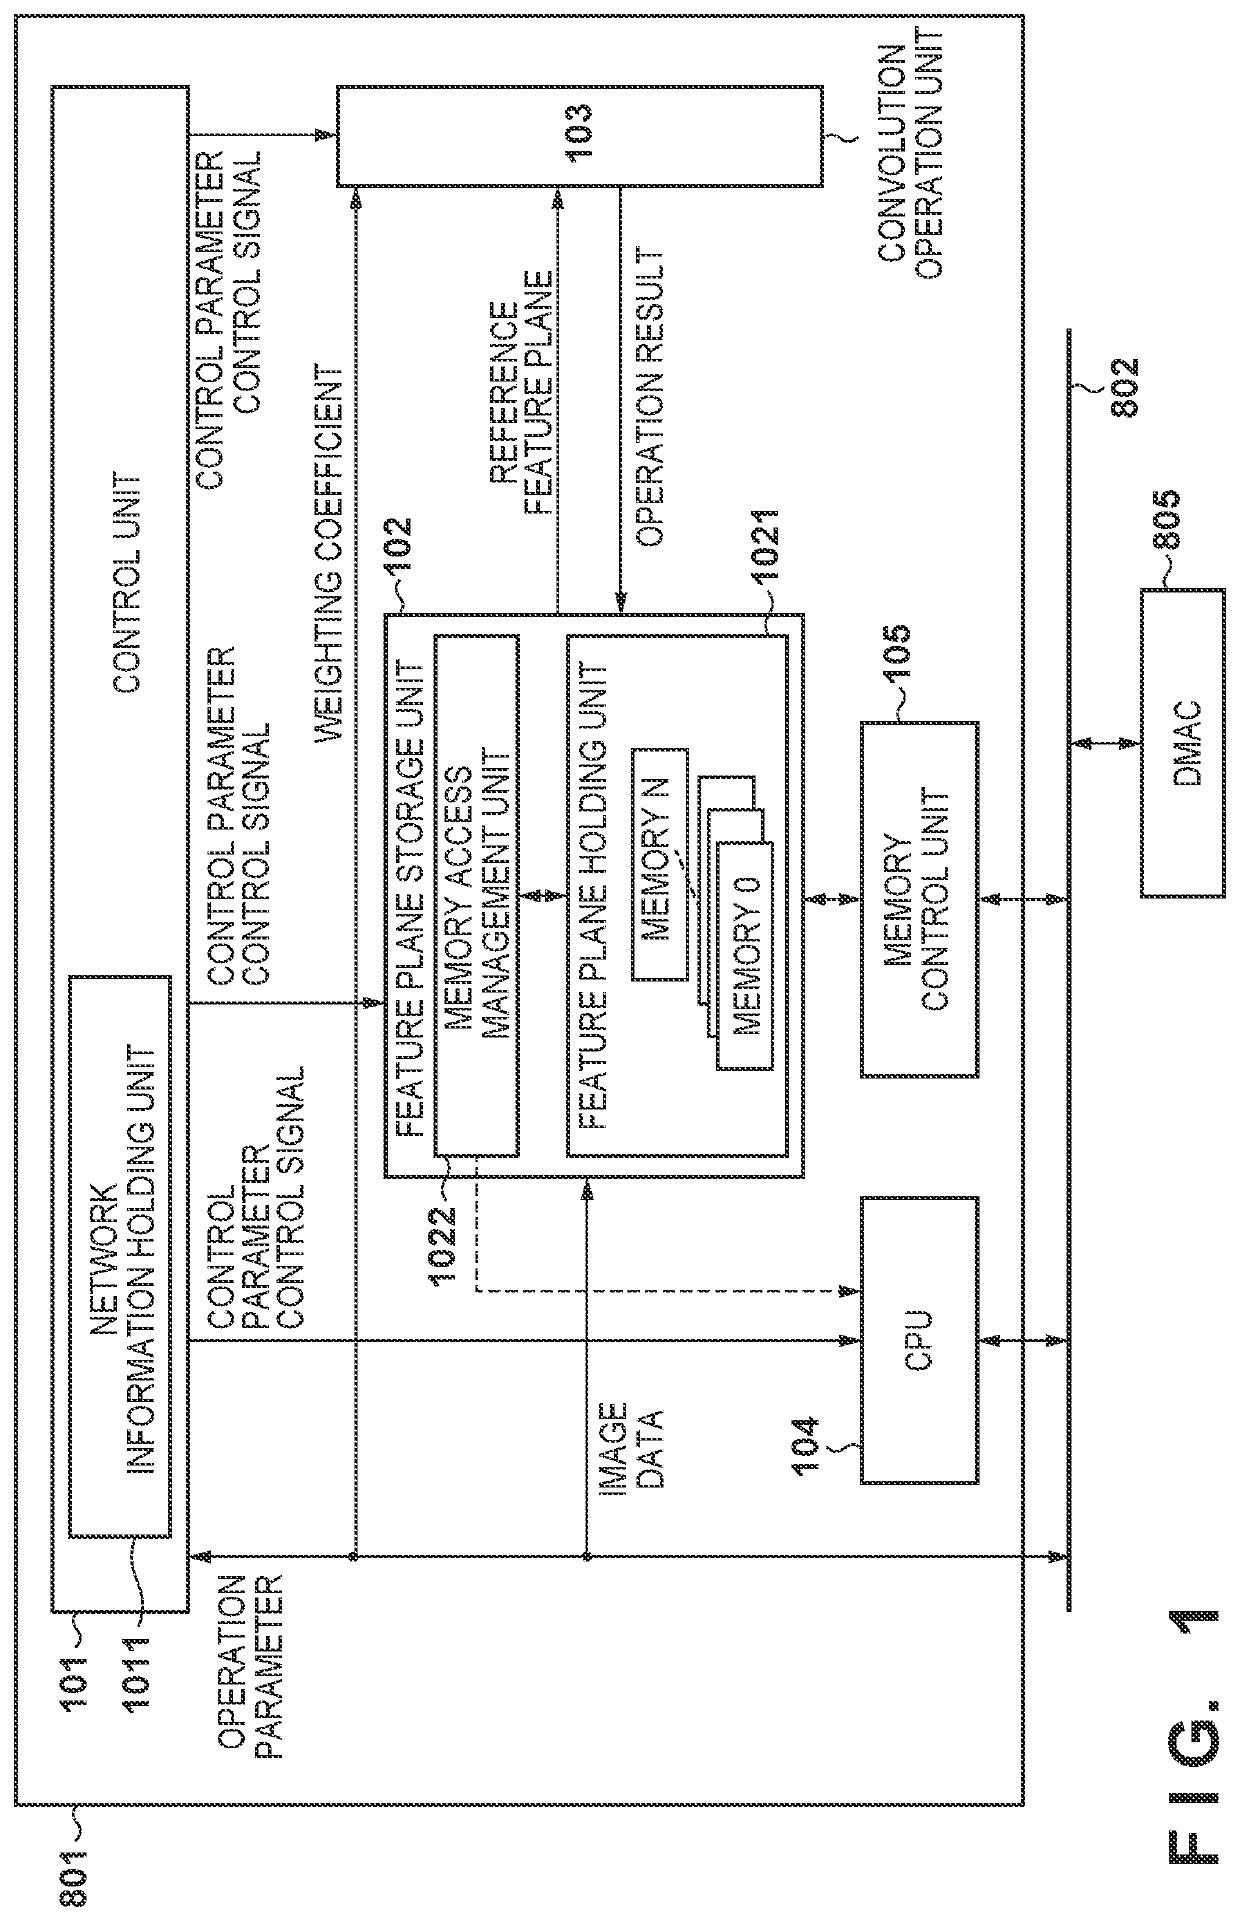 Operation processing apparatus and operation processing method